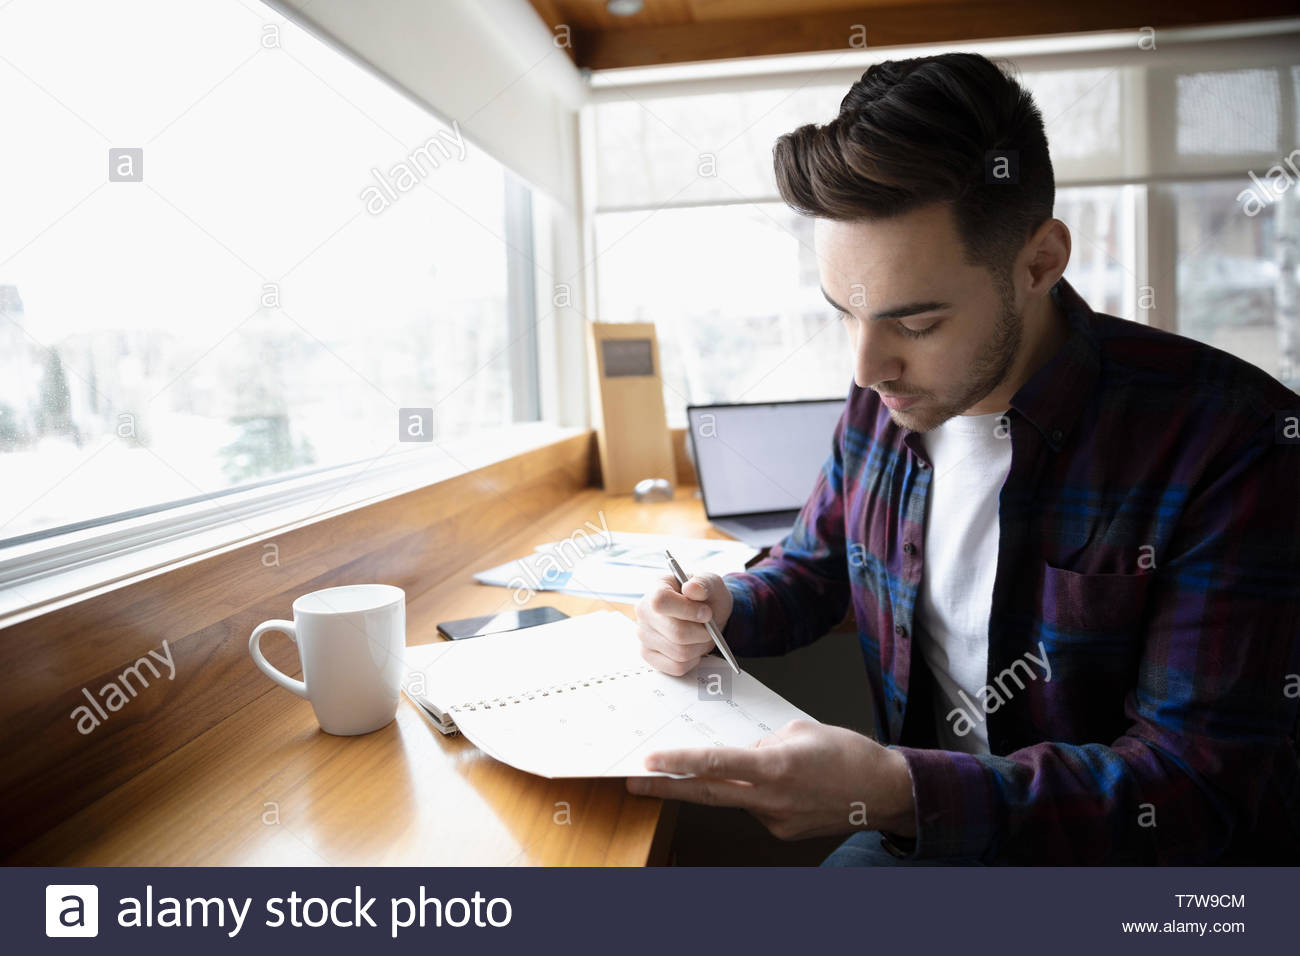 Focused young man working in home office, checking schedule calendar Stock Photo